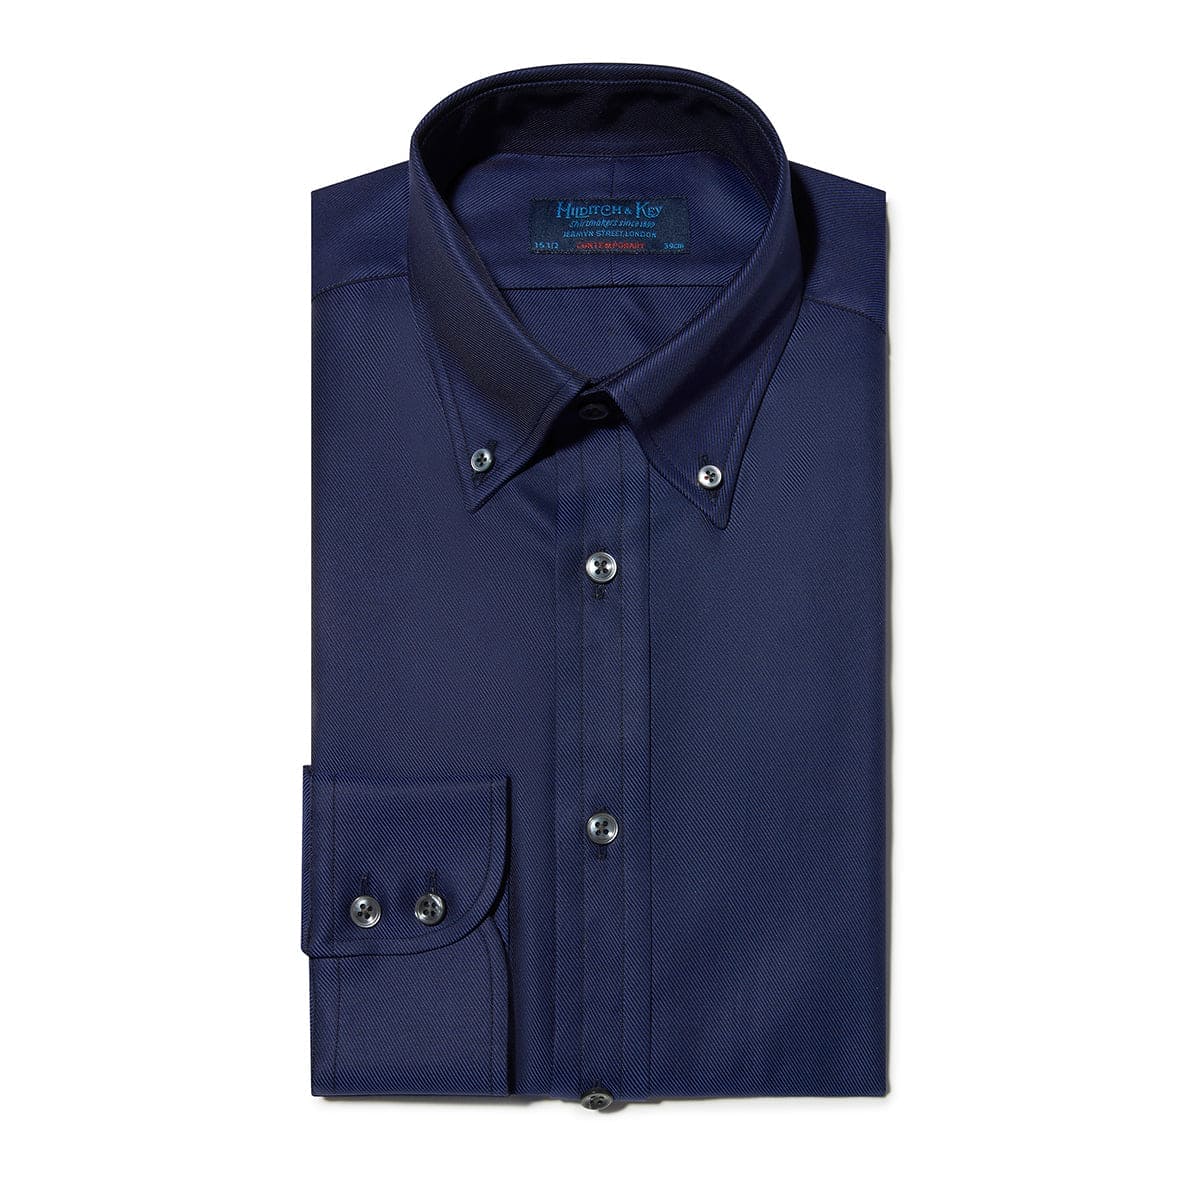 Contemporary Fit, Button Down Collar, Two Button Cuff Shirt In Navy Twill